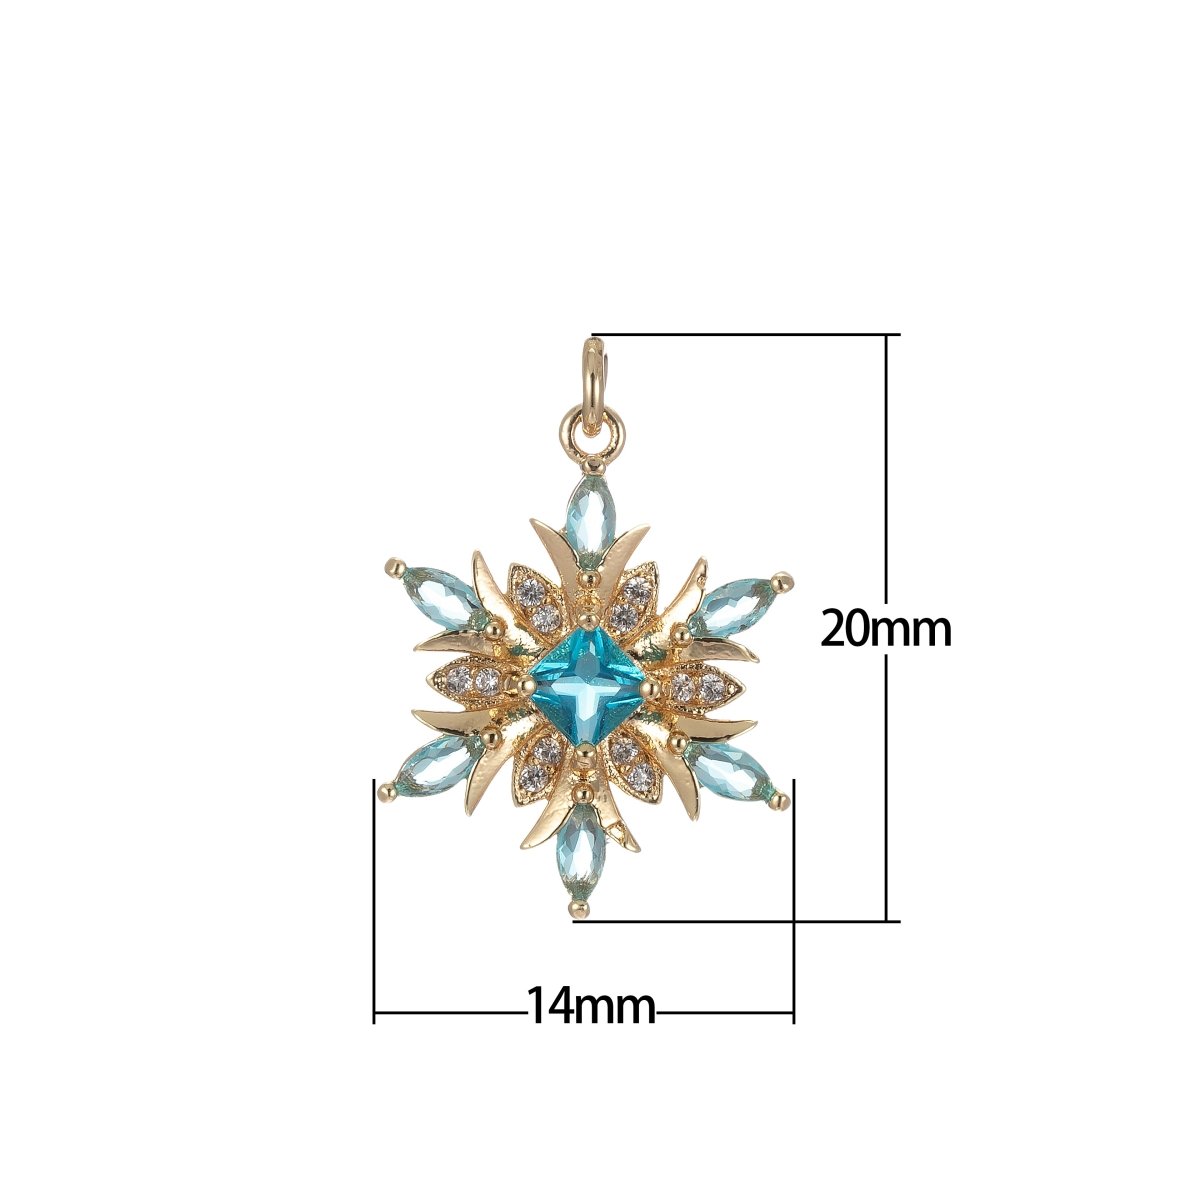 Micro Pave snow Flake Charm for Statement Necklace, Winter Wonderland Inspired Pendant Necklace, DIY Supply Jewelry Gift For Her E-860 E-861 - DLUXCA